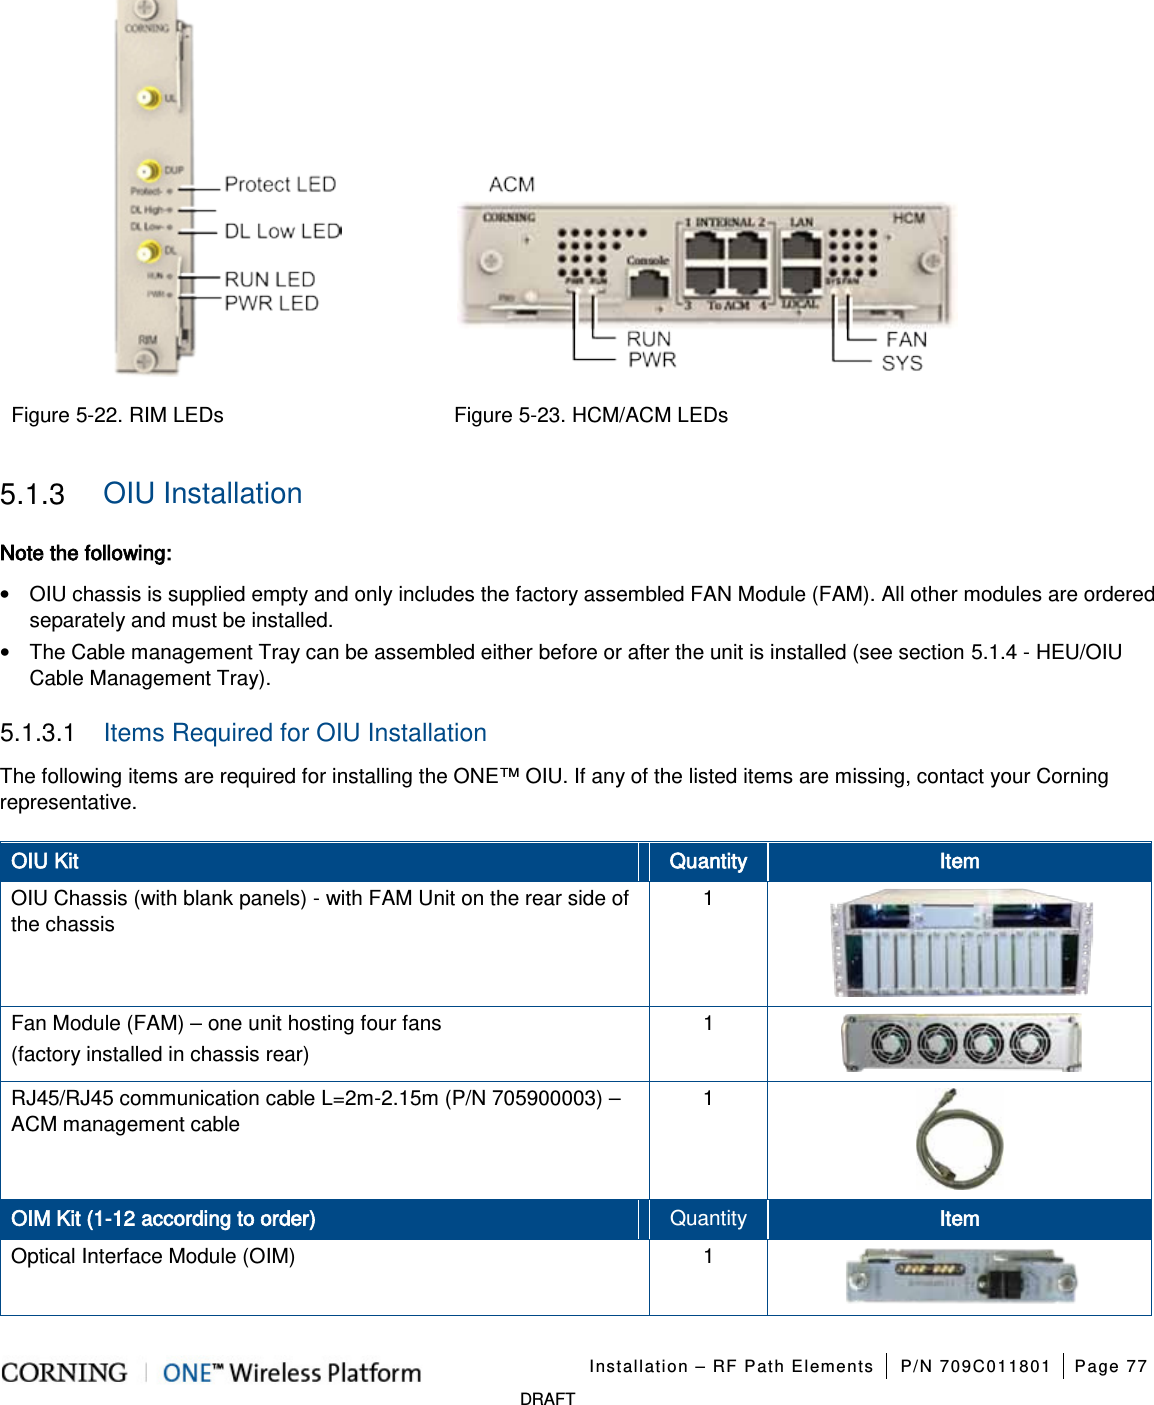   Installation – RF Path Elements P/N 709C011801 Page 77   DRAFT    Figure  5-22. RIM LEDs Figure  5-23. HCM/ACM LEDs 5.1.3  OIU Installation Note the following: • OIU chassis is supplied empty and only includes the factory assembled FAN Module (FAM). All other modules are ordered separately and must be installed. • The Cable management Tray can be assembled either before or after the unit is installed (see section  5.1.4 - HEU/OIU Cable Management Tray). 5.1.3.1  Items Required for OIU Installation The following items are required for installing the ONE™ OIU. If any of the listed items are missing, contact your Corning representative. OIU Kit Quantity Item OIU Chassis (with blank panels) - with FAM Unit on the rear side of the chassis 1  Fan Module (FAM) – one unit hosting four fans   (factory installed in chassis rear) 1  RJ45/RJ45 communication cable L=2m-2.15m (P/N 705900003) – ACM management cable   1  OIM Kit (1-12 according to order) Quantity Item Optical Interface Module (OIM)      1  